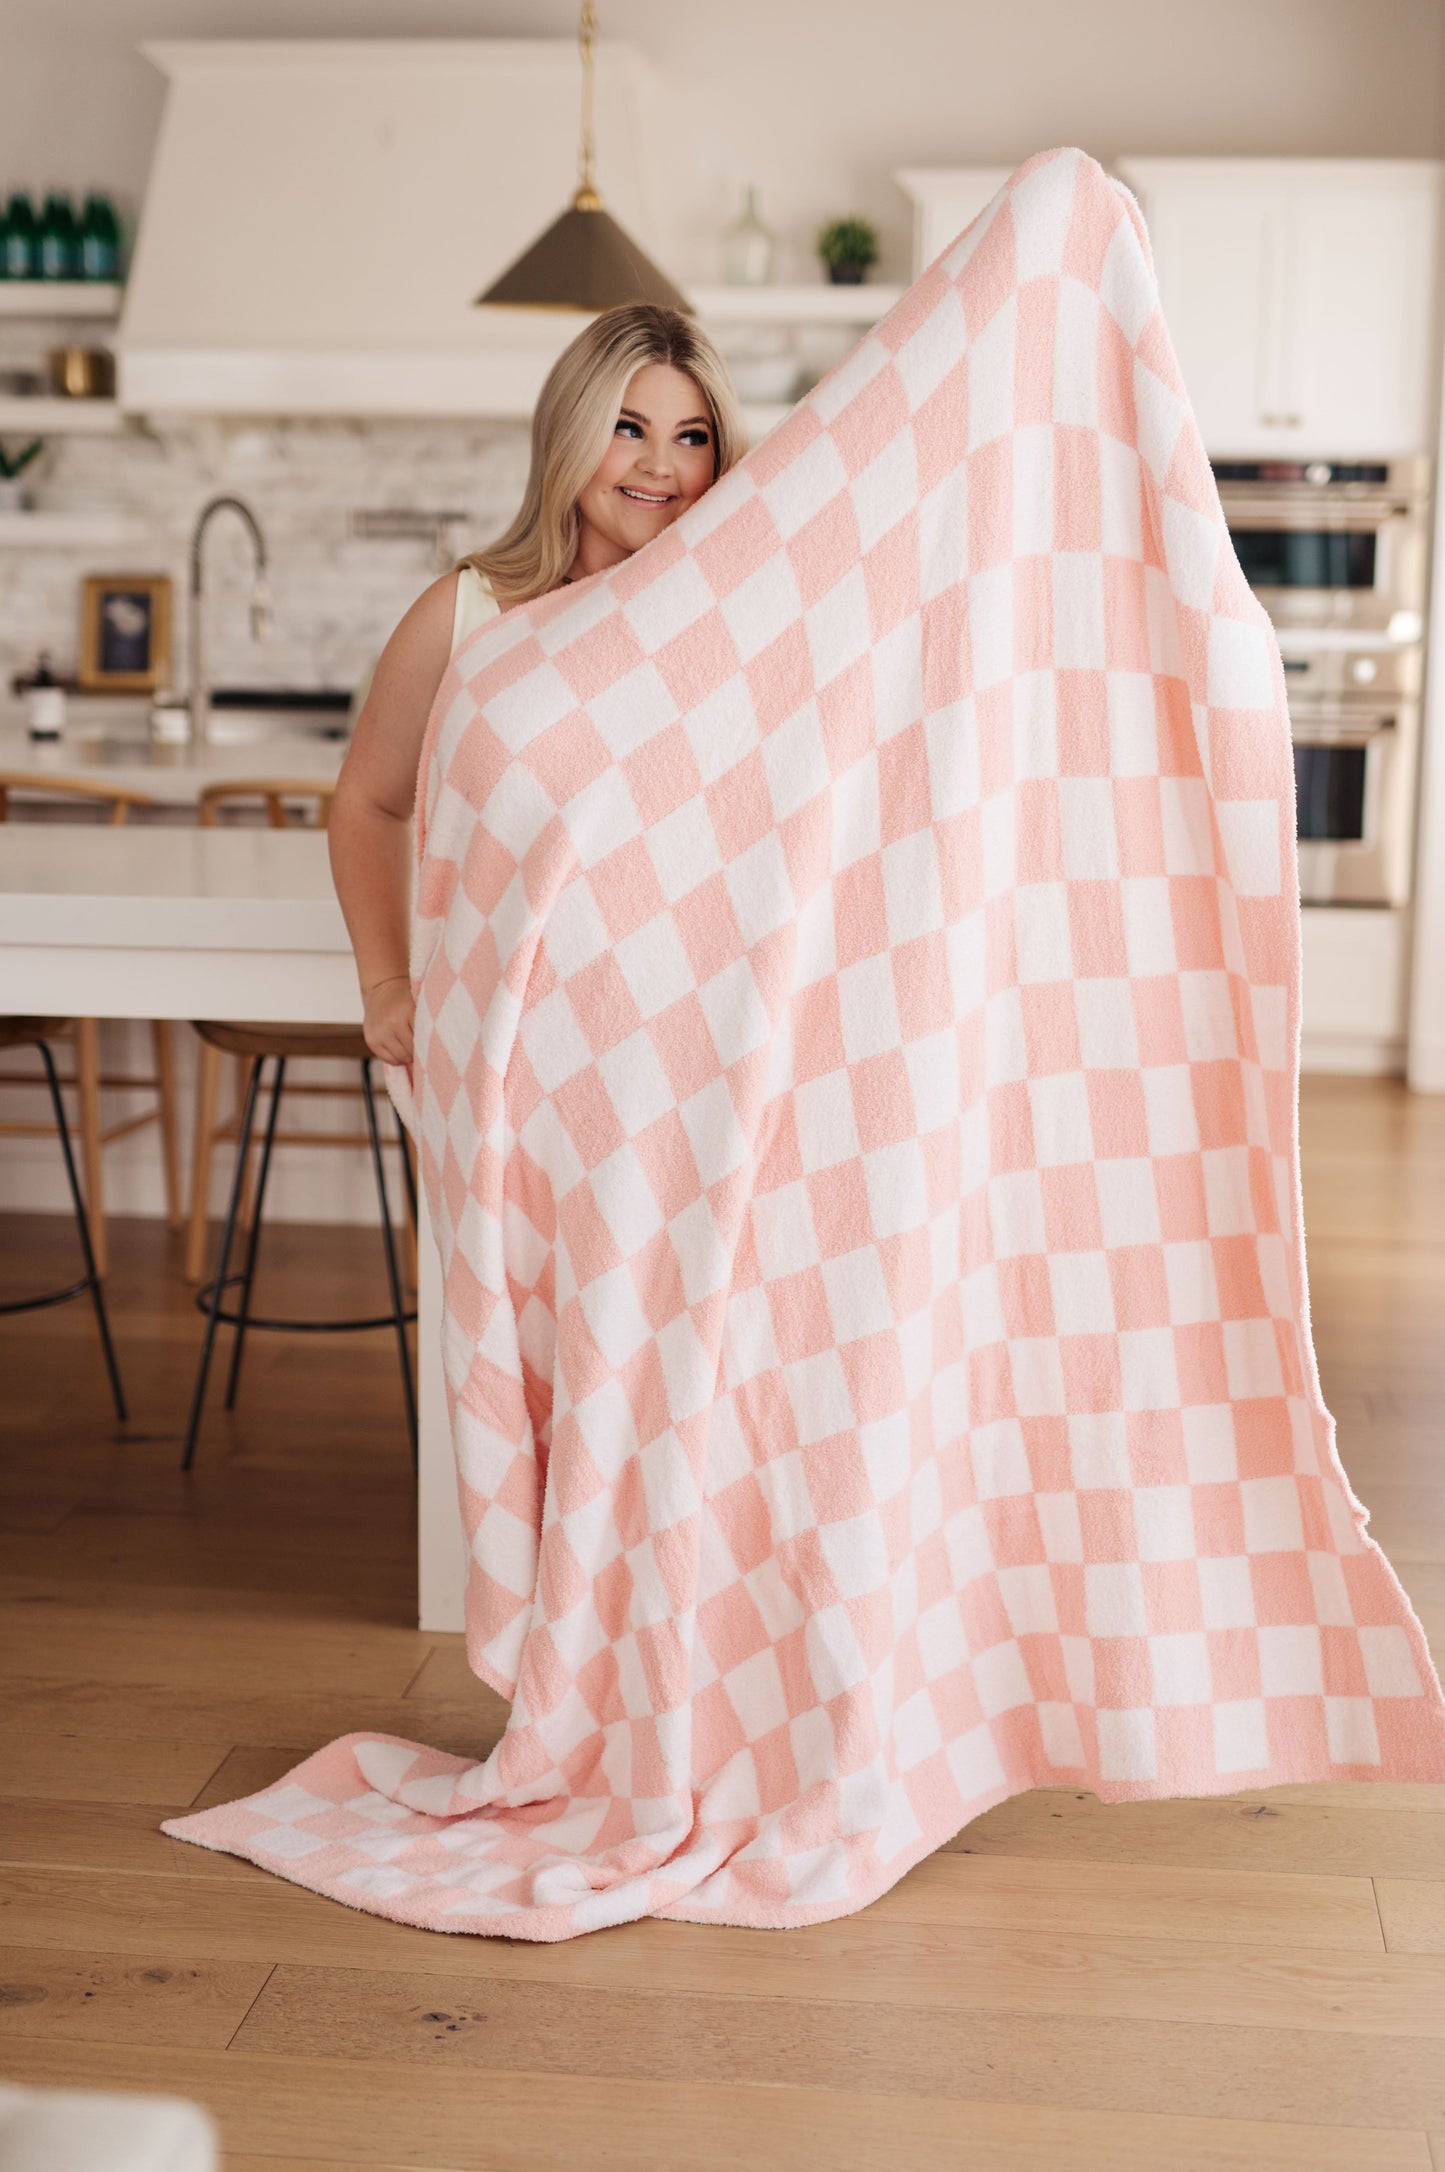 Blanket in Pink Check